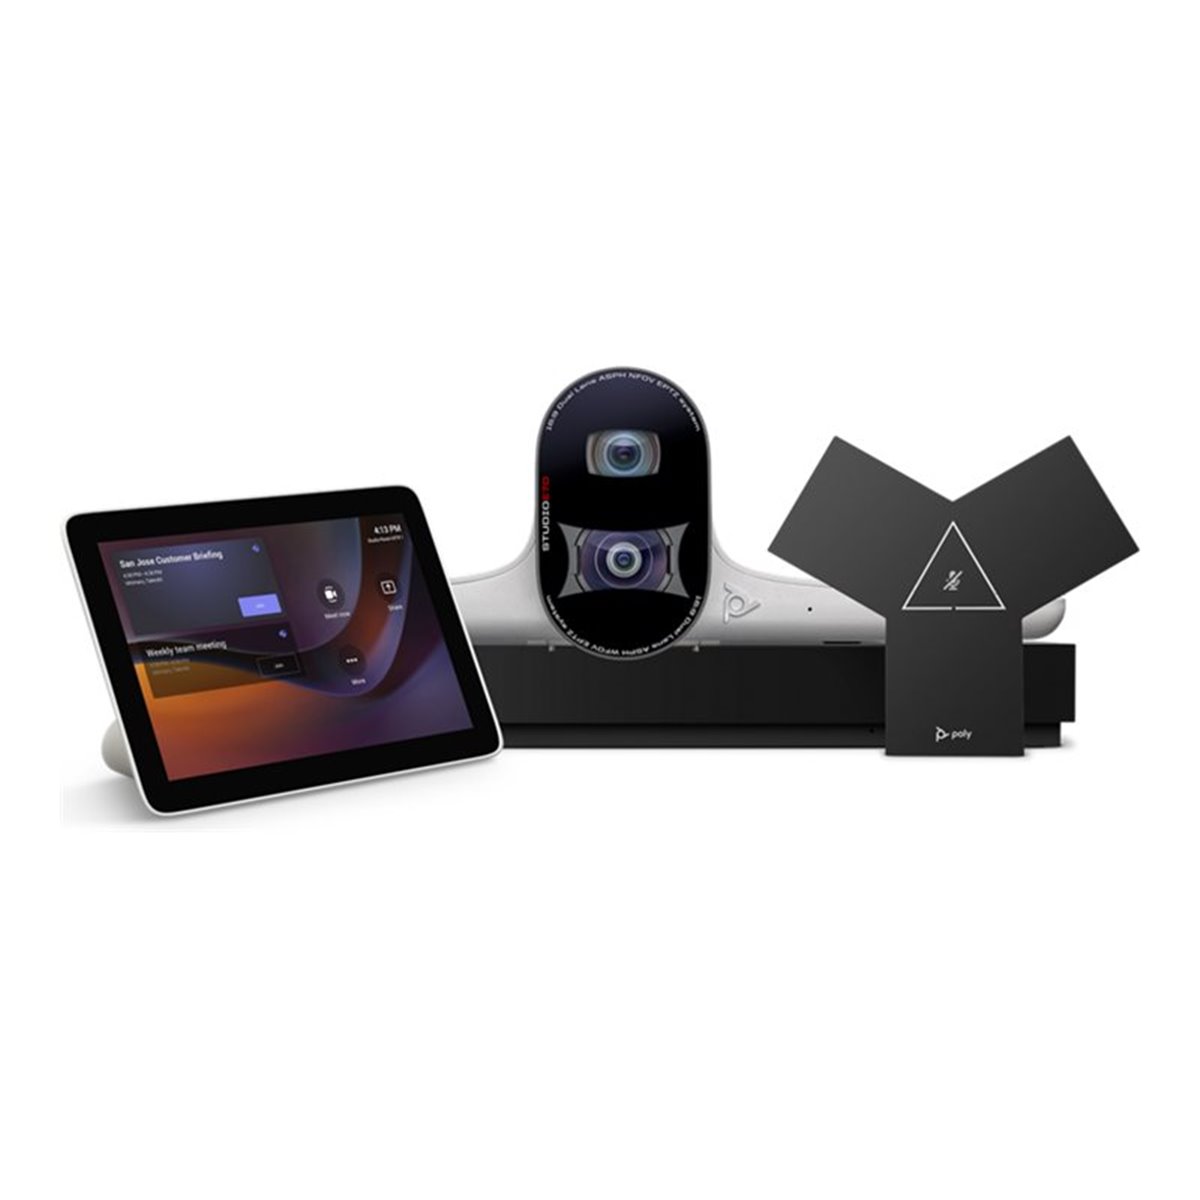 Poly G7500 Video Conferencing System with Studio E70 and TC10 Controller Kit EMEA - INTL English Loc  Euro plug